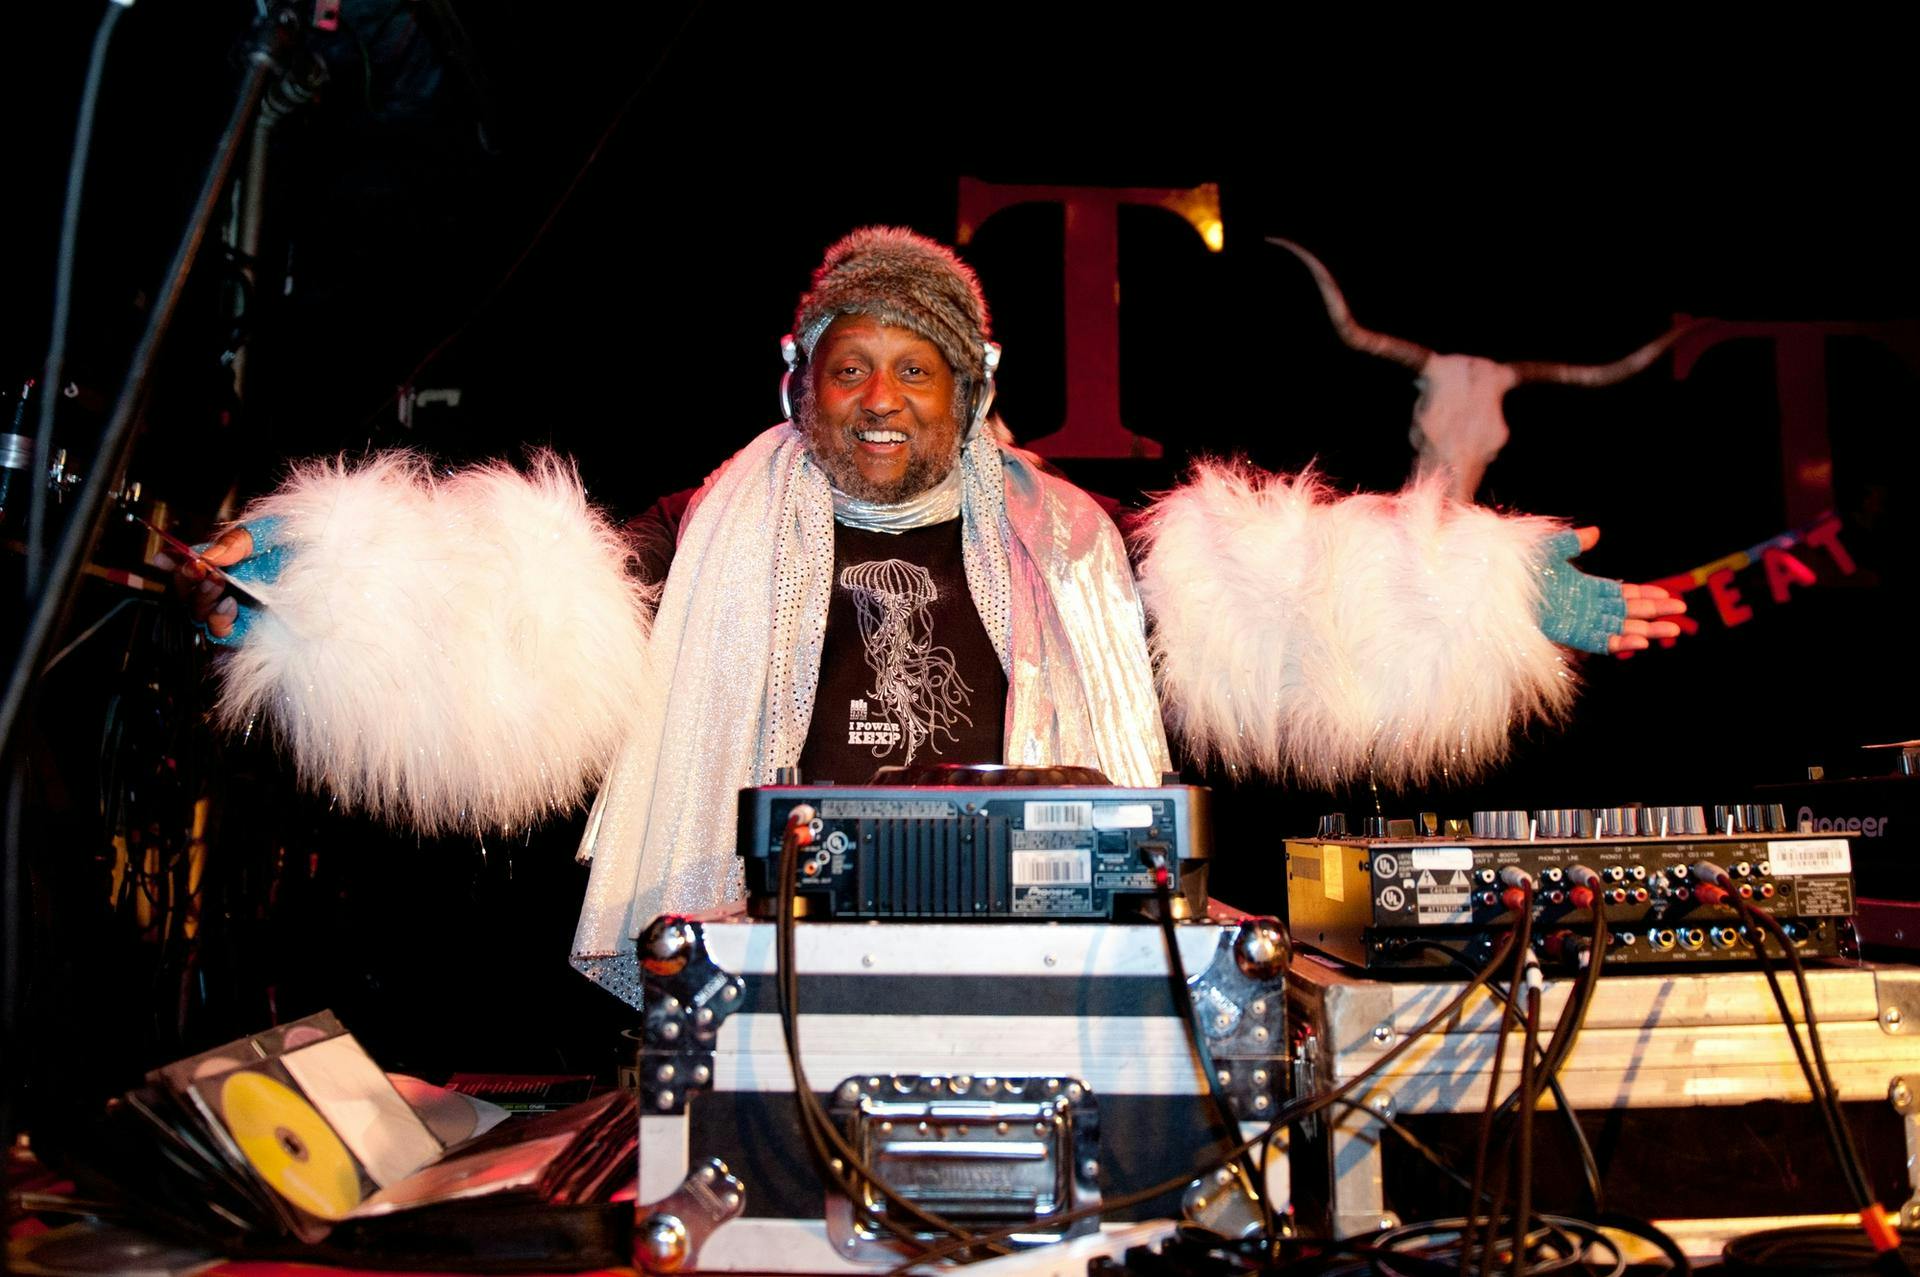 Riz Rollins stands behind DJ equipment wearing a sparkly silver scarf and white fuzzy sleeves